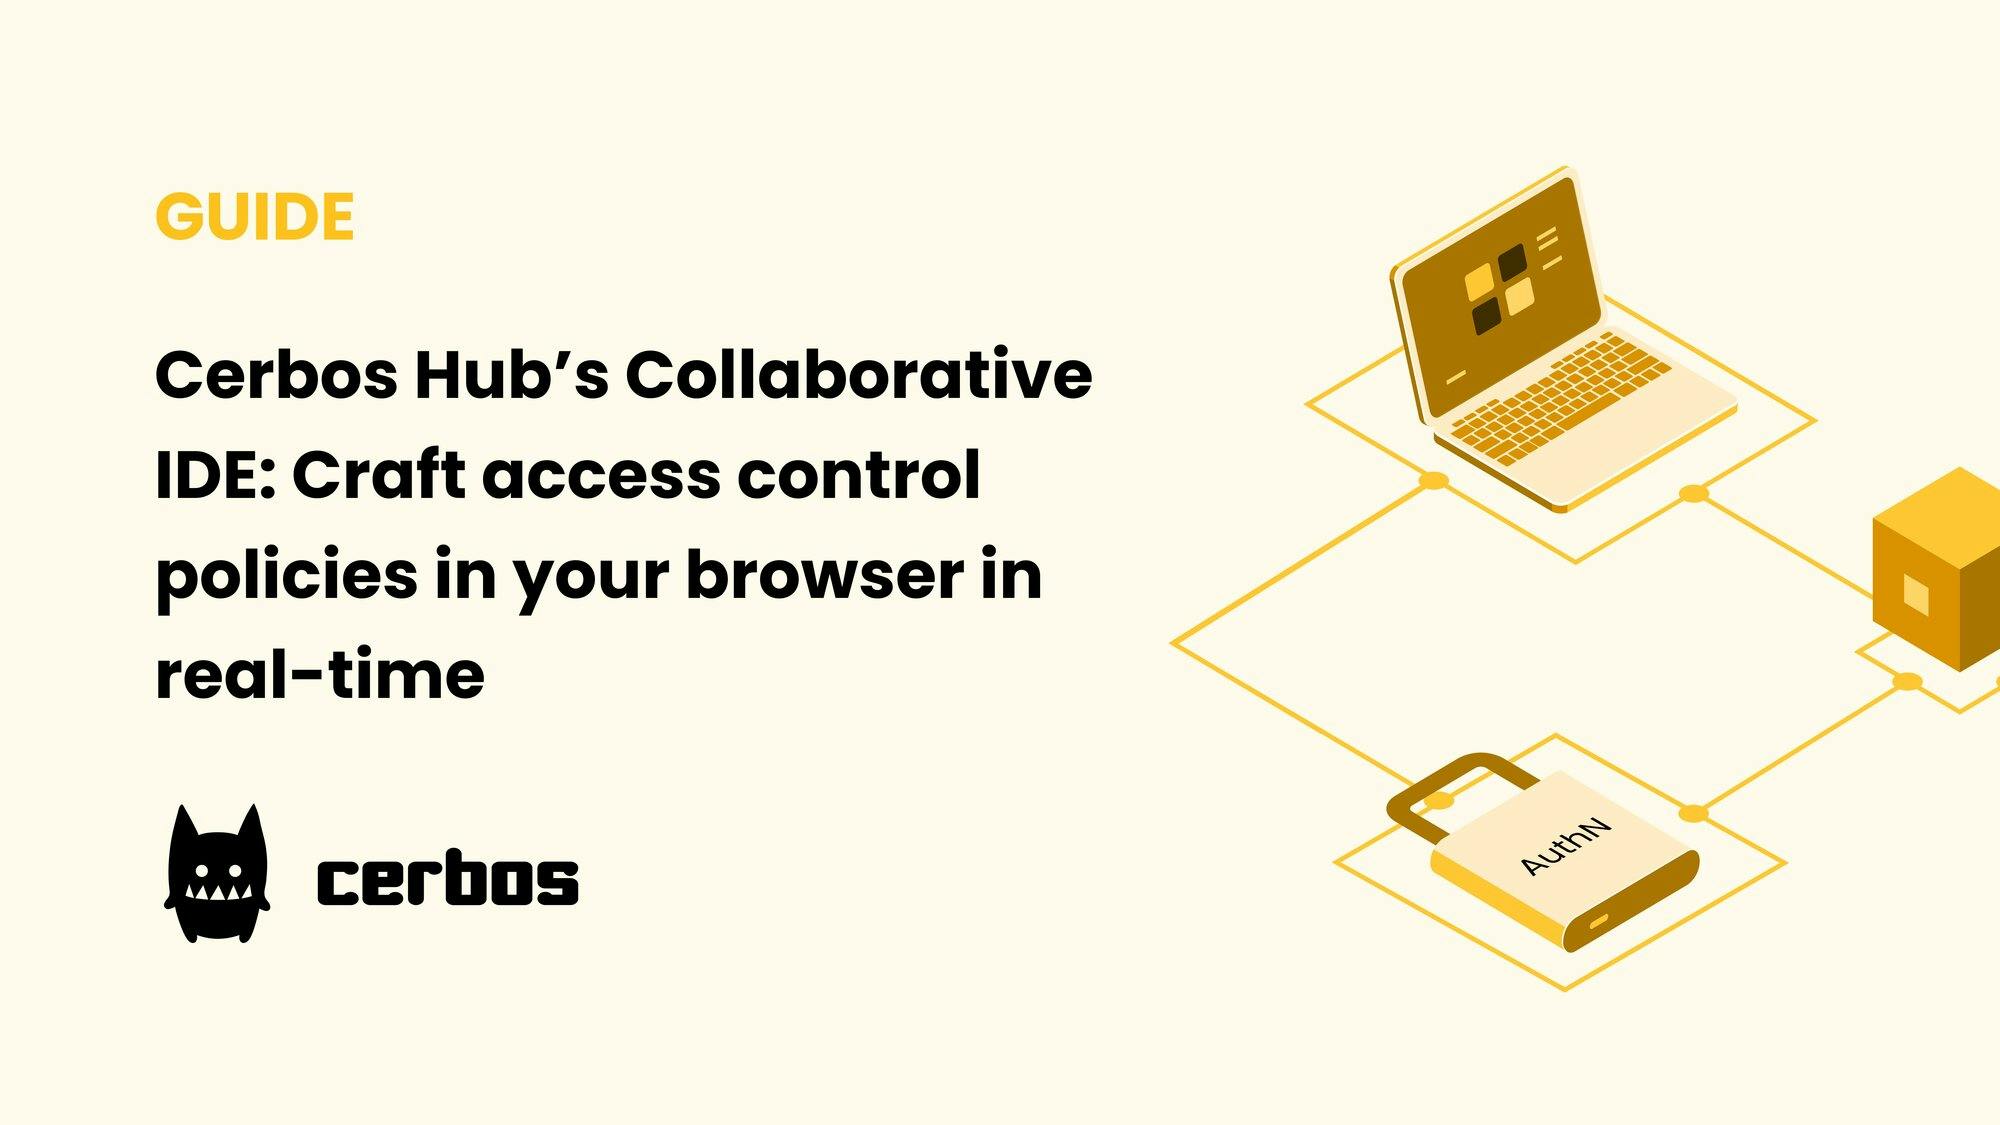 Cerbos Hub’s Collaborative IDE: Craft access control policies in your browser in real-time